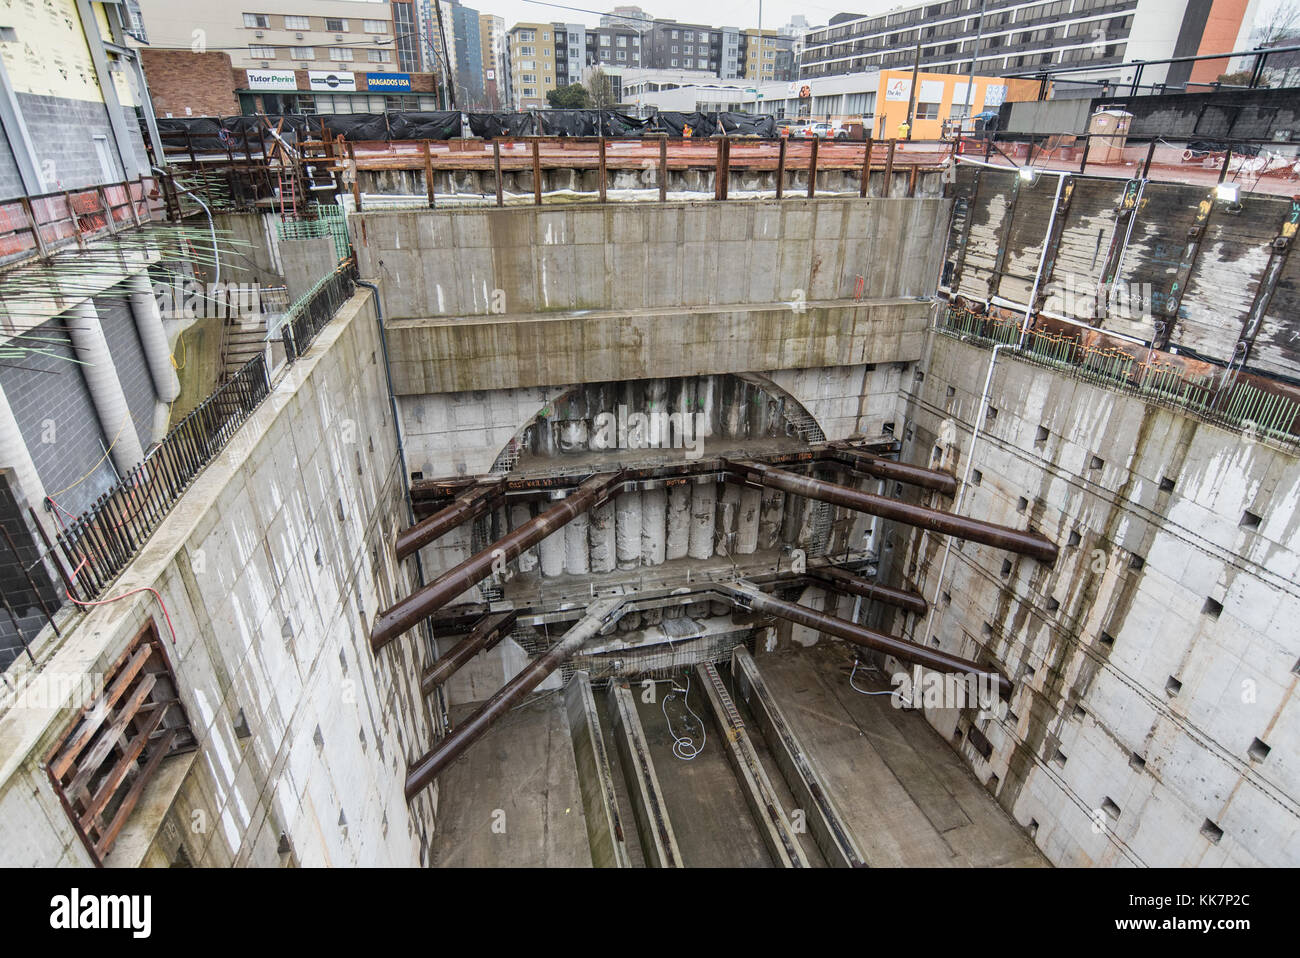 Alaskan Way Viaduct Replacement Program.This photo shows progress on the future southbound SR 99 lanes.  Crews assembled the SR 99 tunneling machine. Crews are building the southbound deck on top of the northbound lanes. Stock Photo